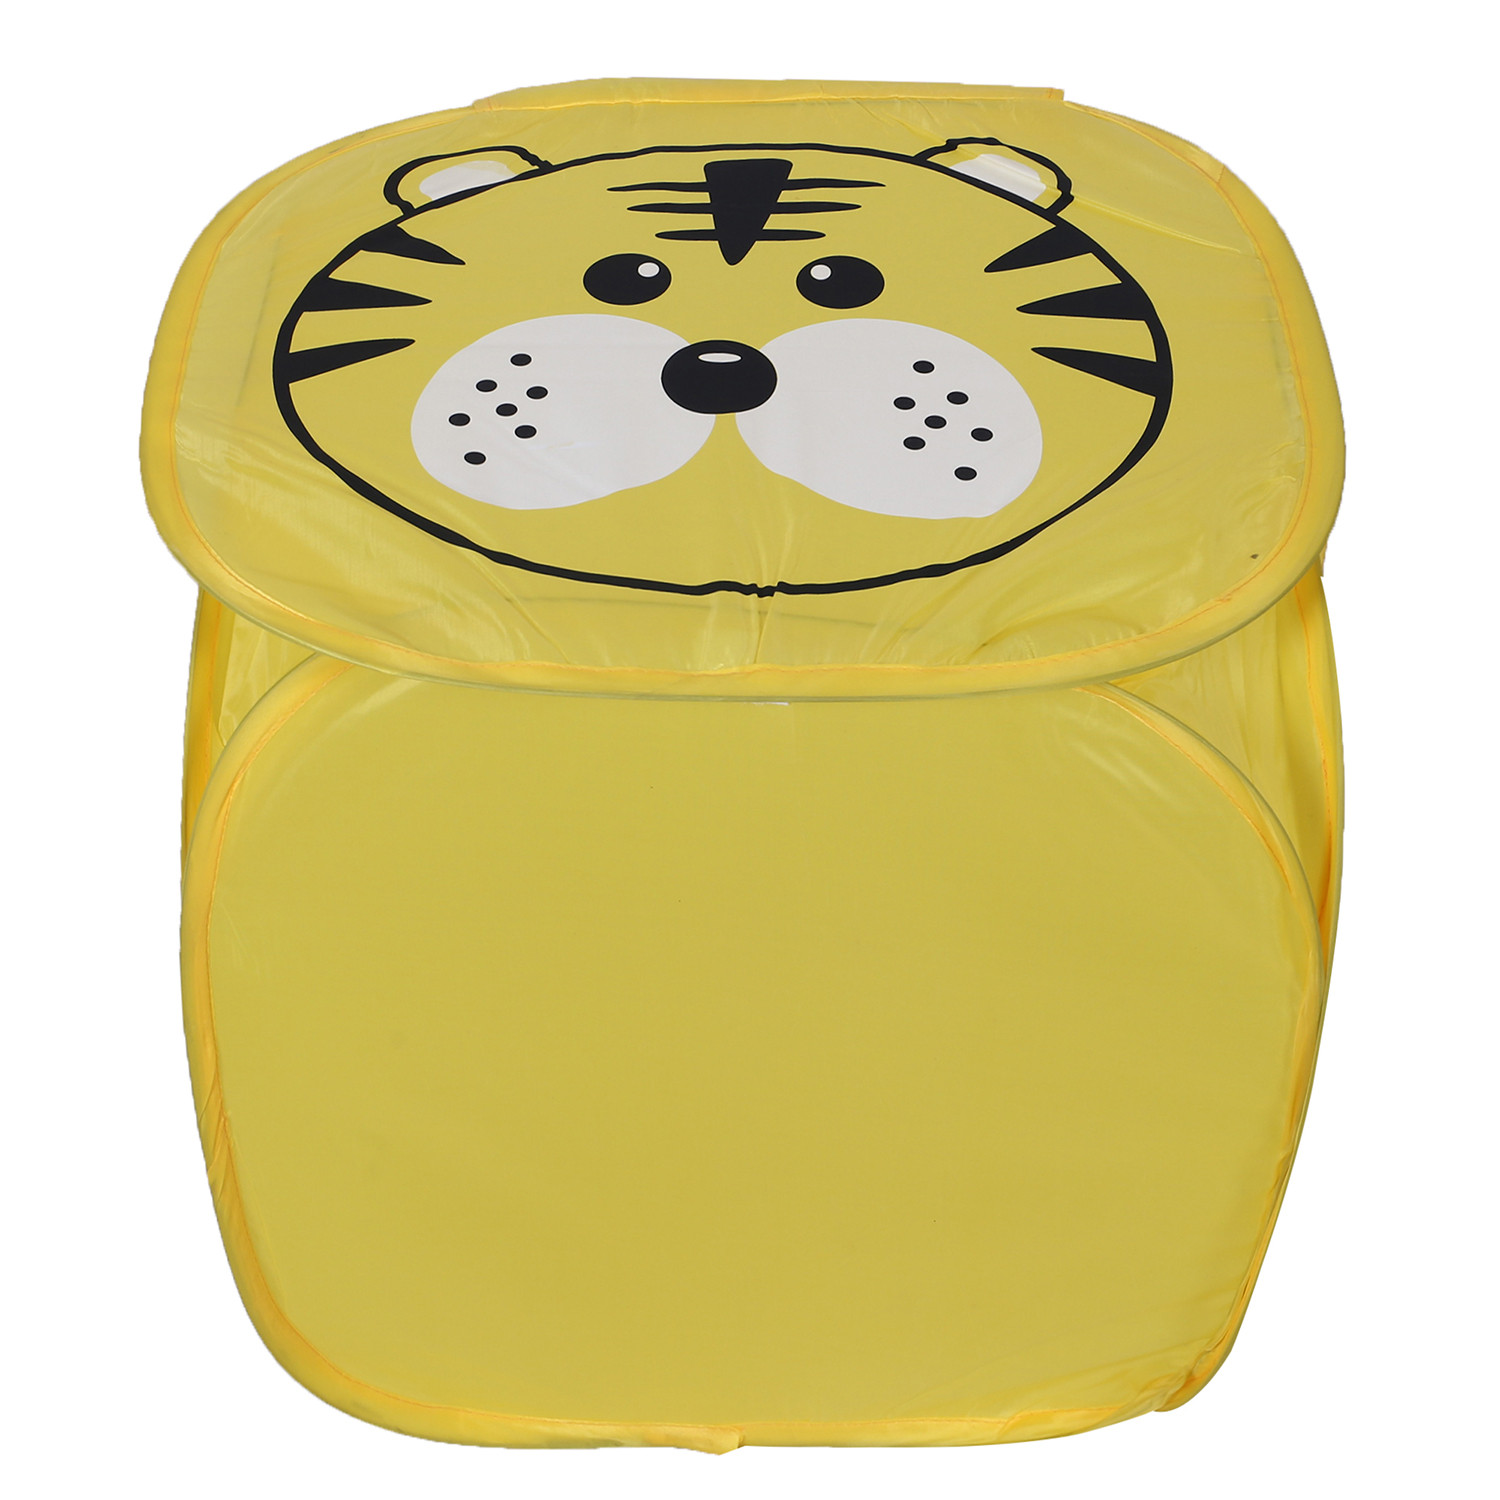 Kuber Industries Polyester Durable & Collapsible Tiger Print Square Laundry Basket|Clothes Storage Box With Lid & Side Handles,45 Ltr.(Yellow)